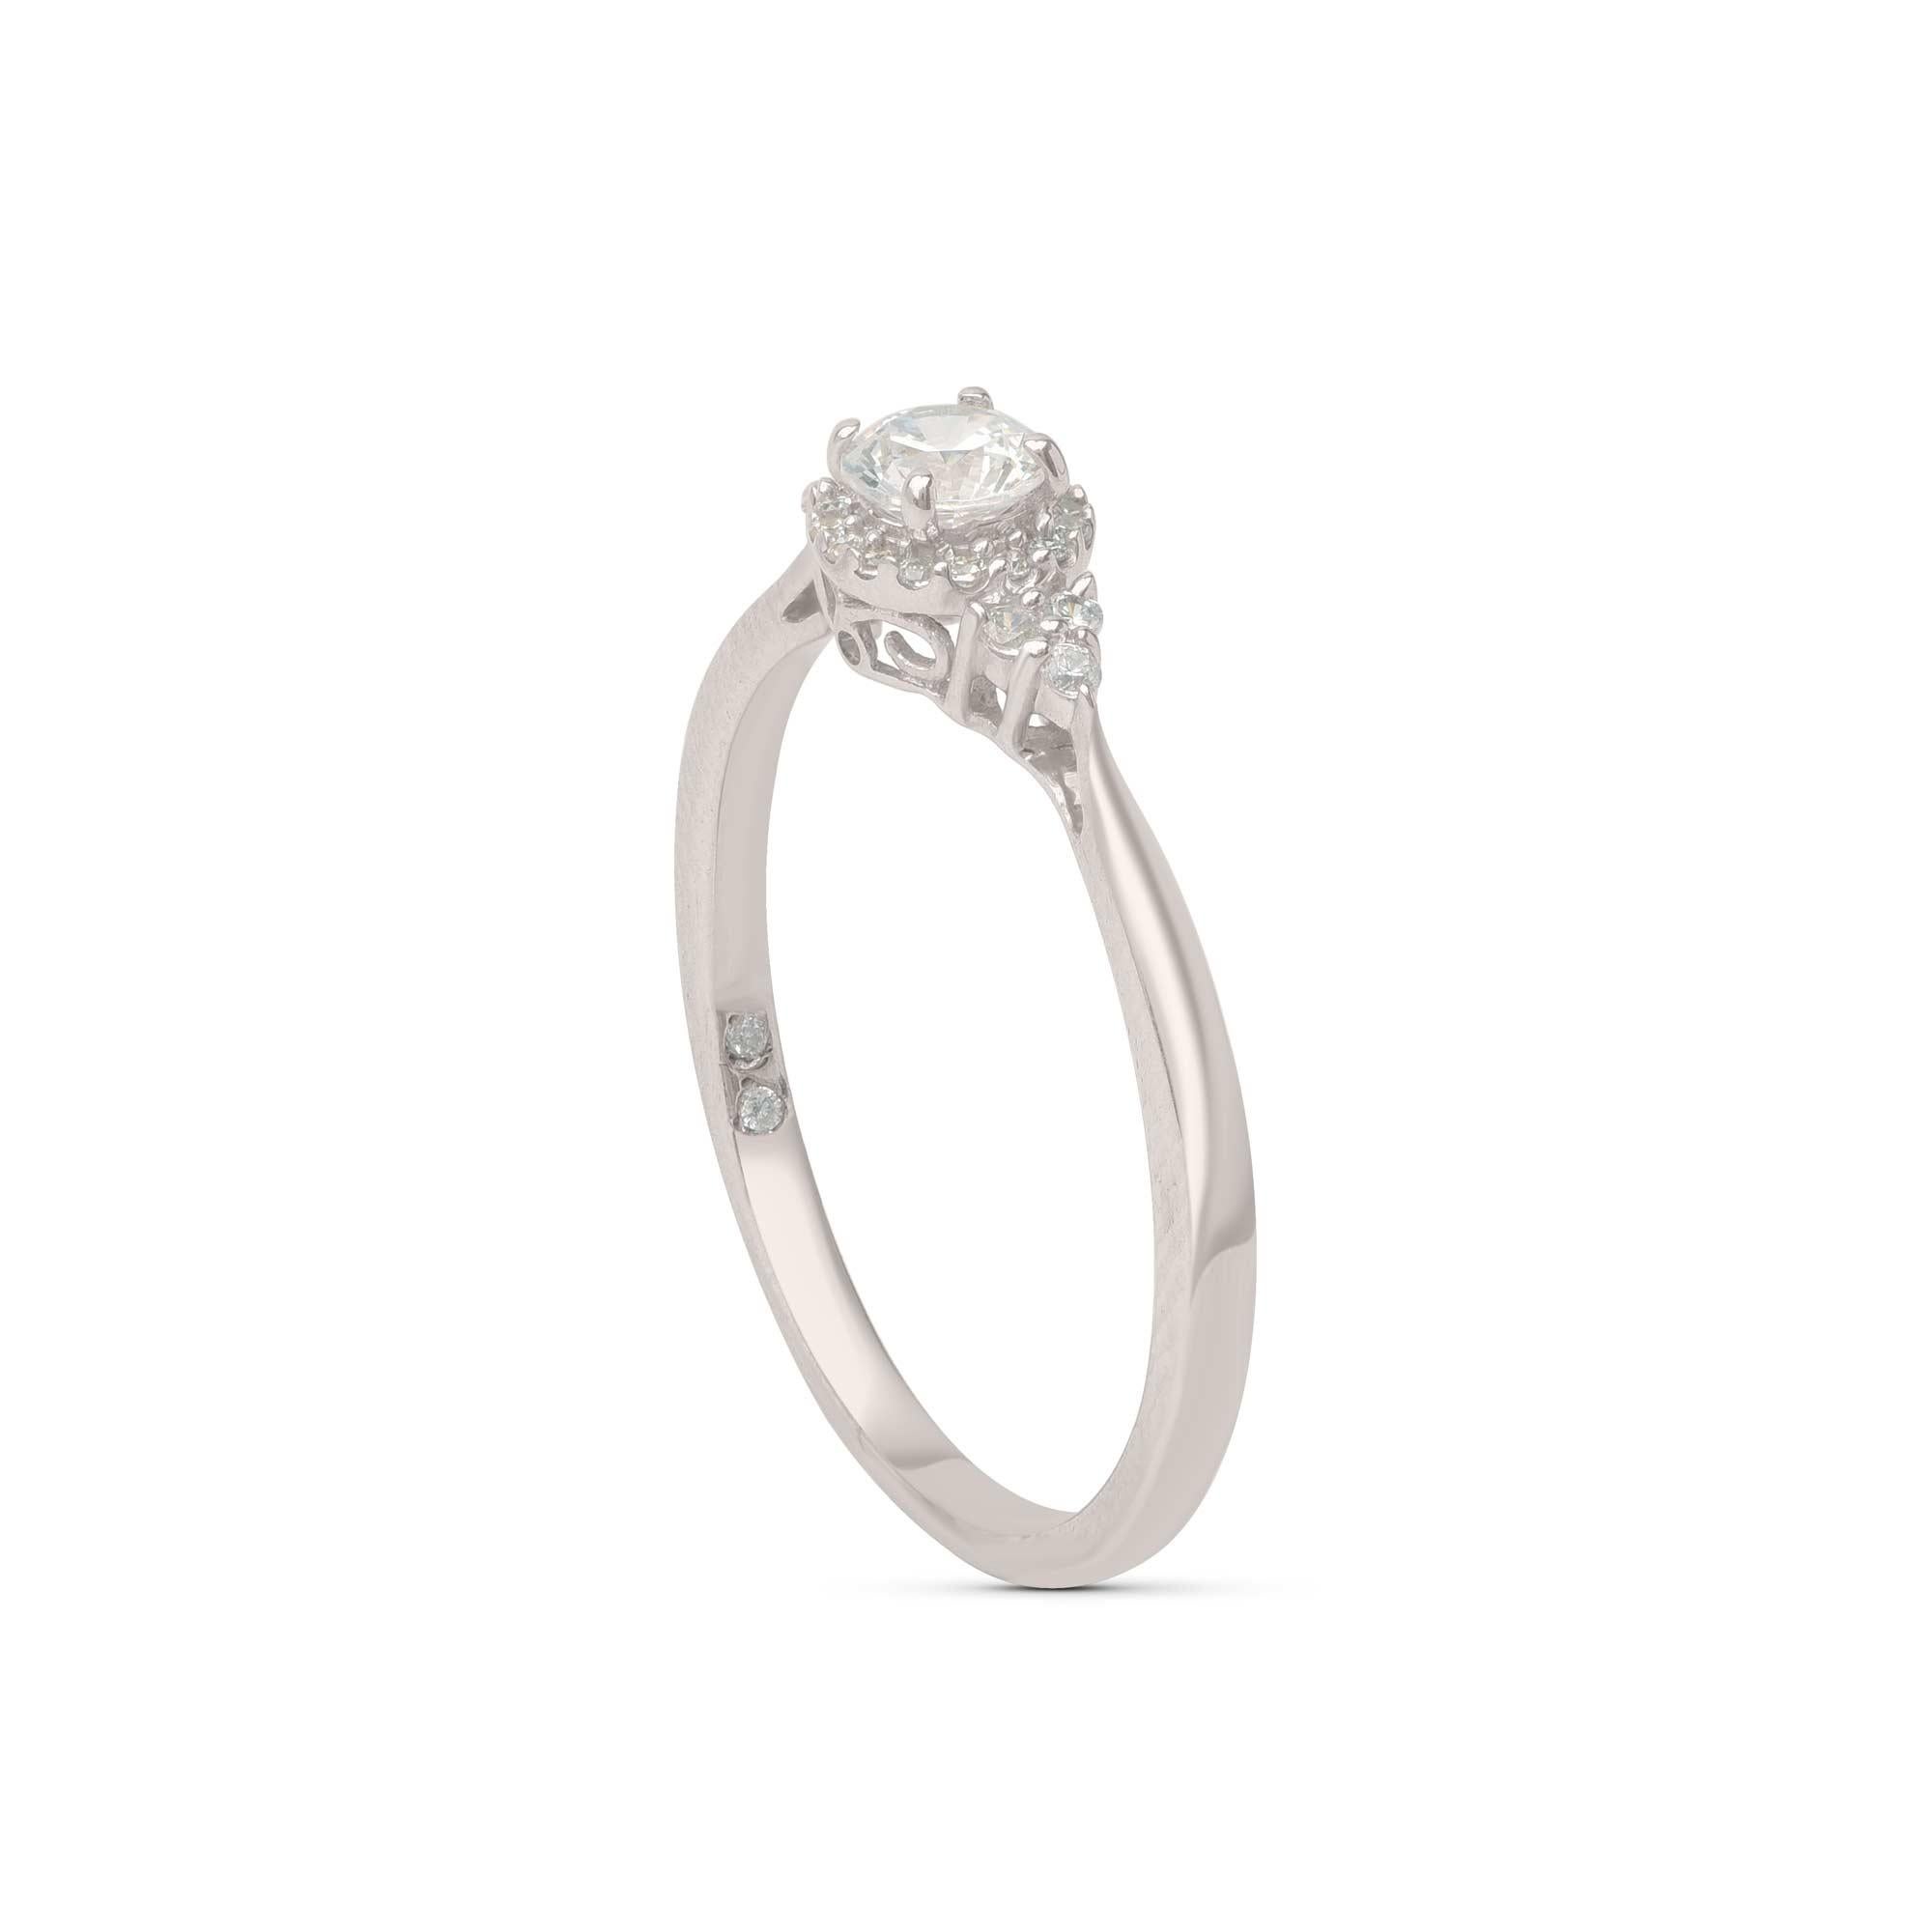 Beautifully studded with 25 brilliant natural white diamonds in prong, micro-pave setting and designed in 18-karat white gold. The diamonds are graded H Color, I1 Clarity. 

Metal color and ring size can be customized on request. 

This piece is